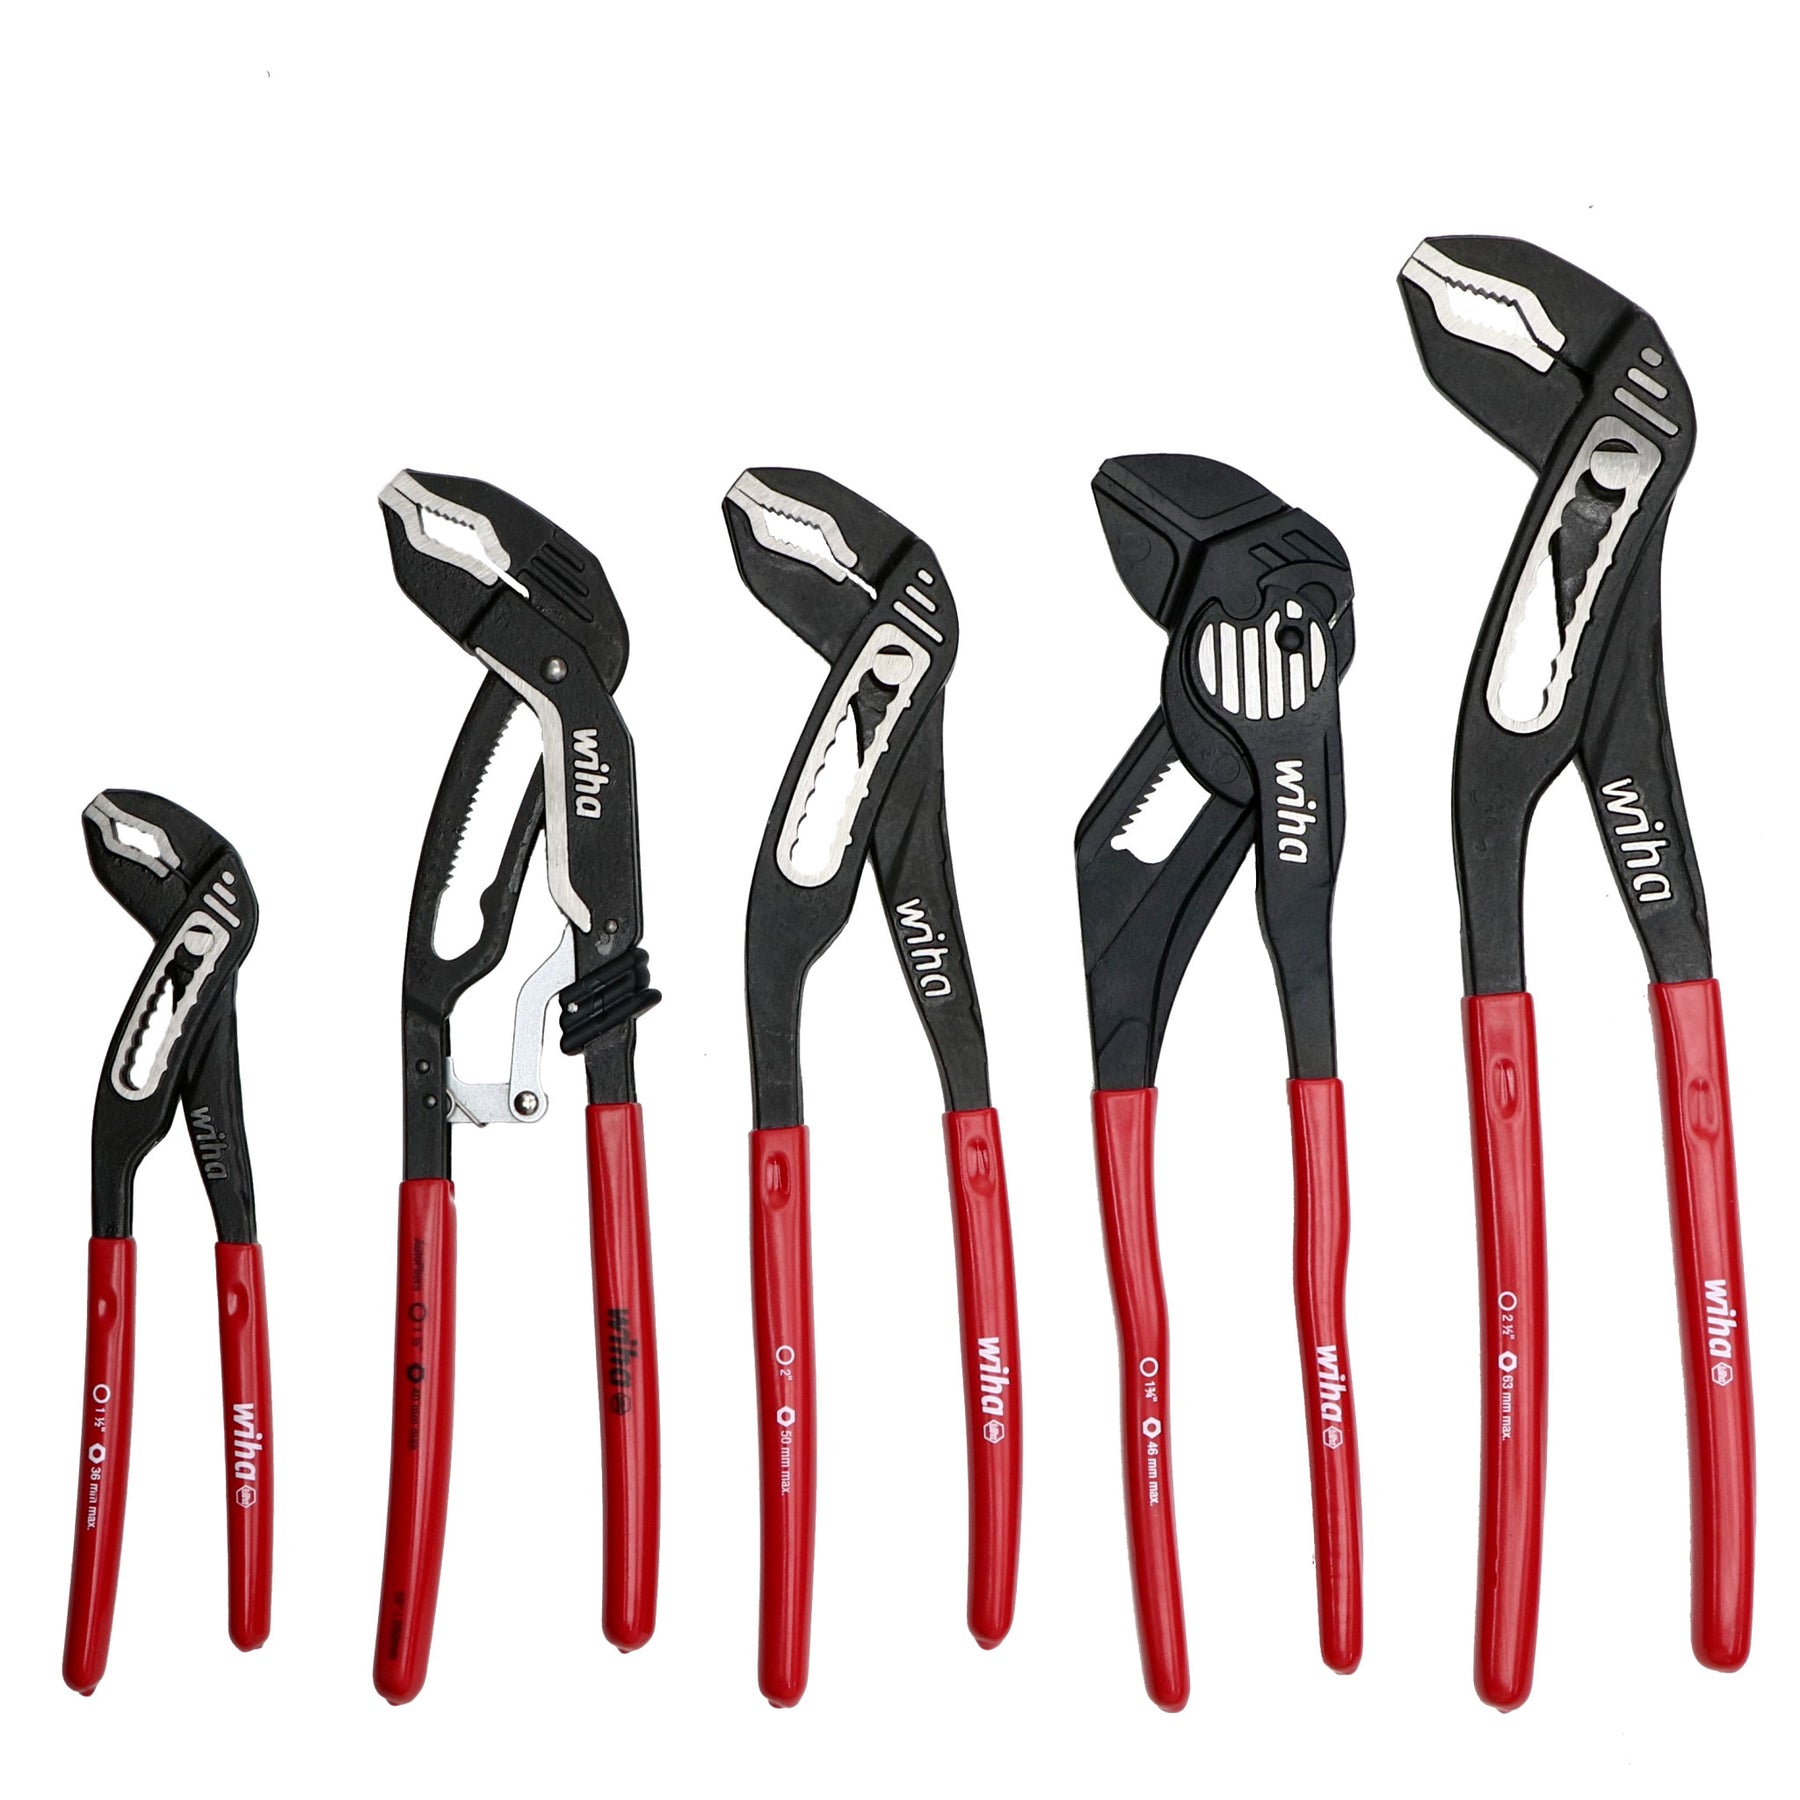 8 Piece Classic Grip Pliers and Cutters Tray Set